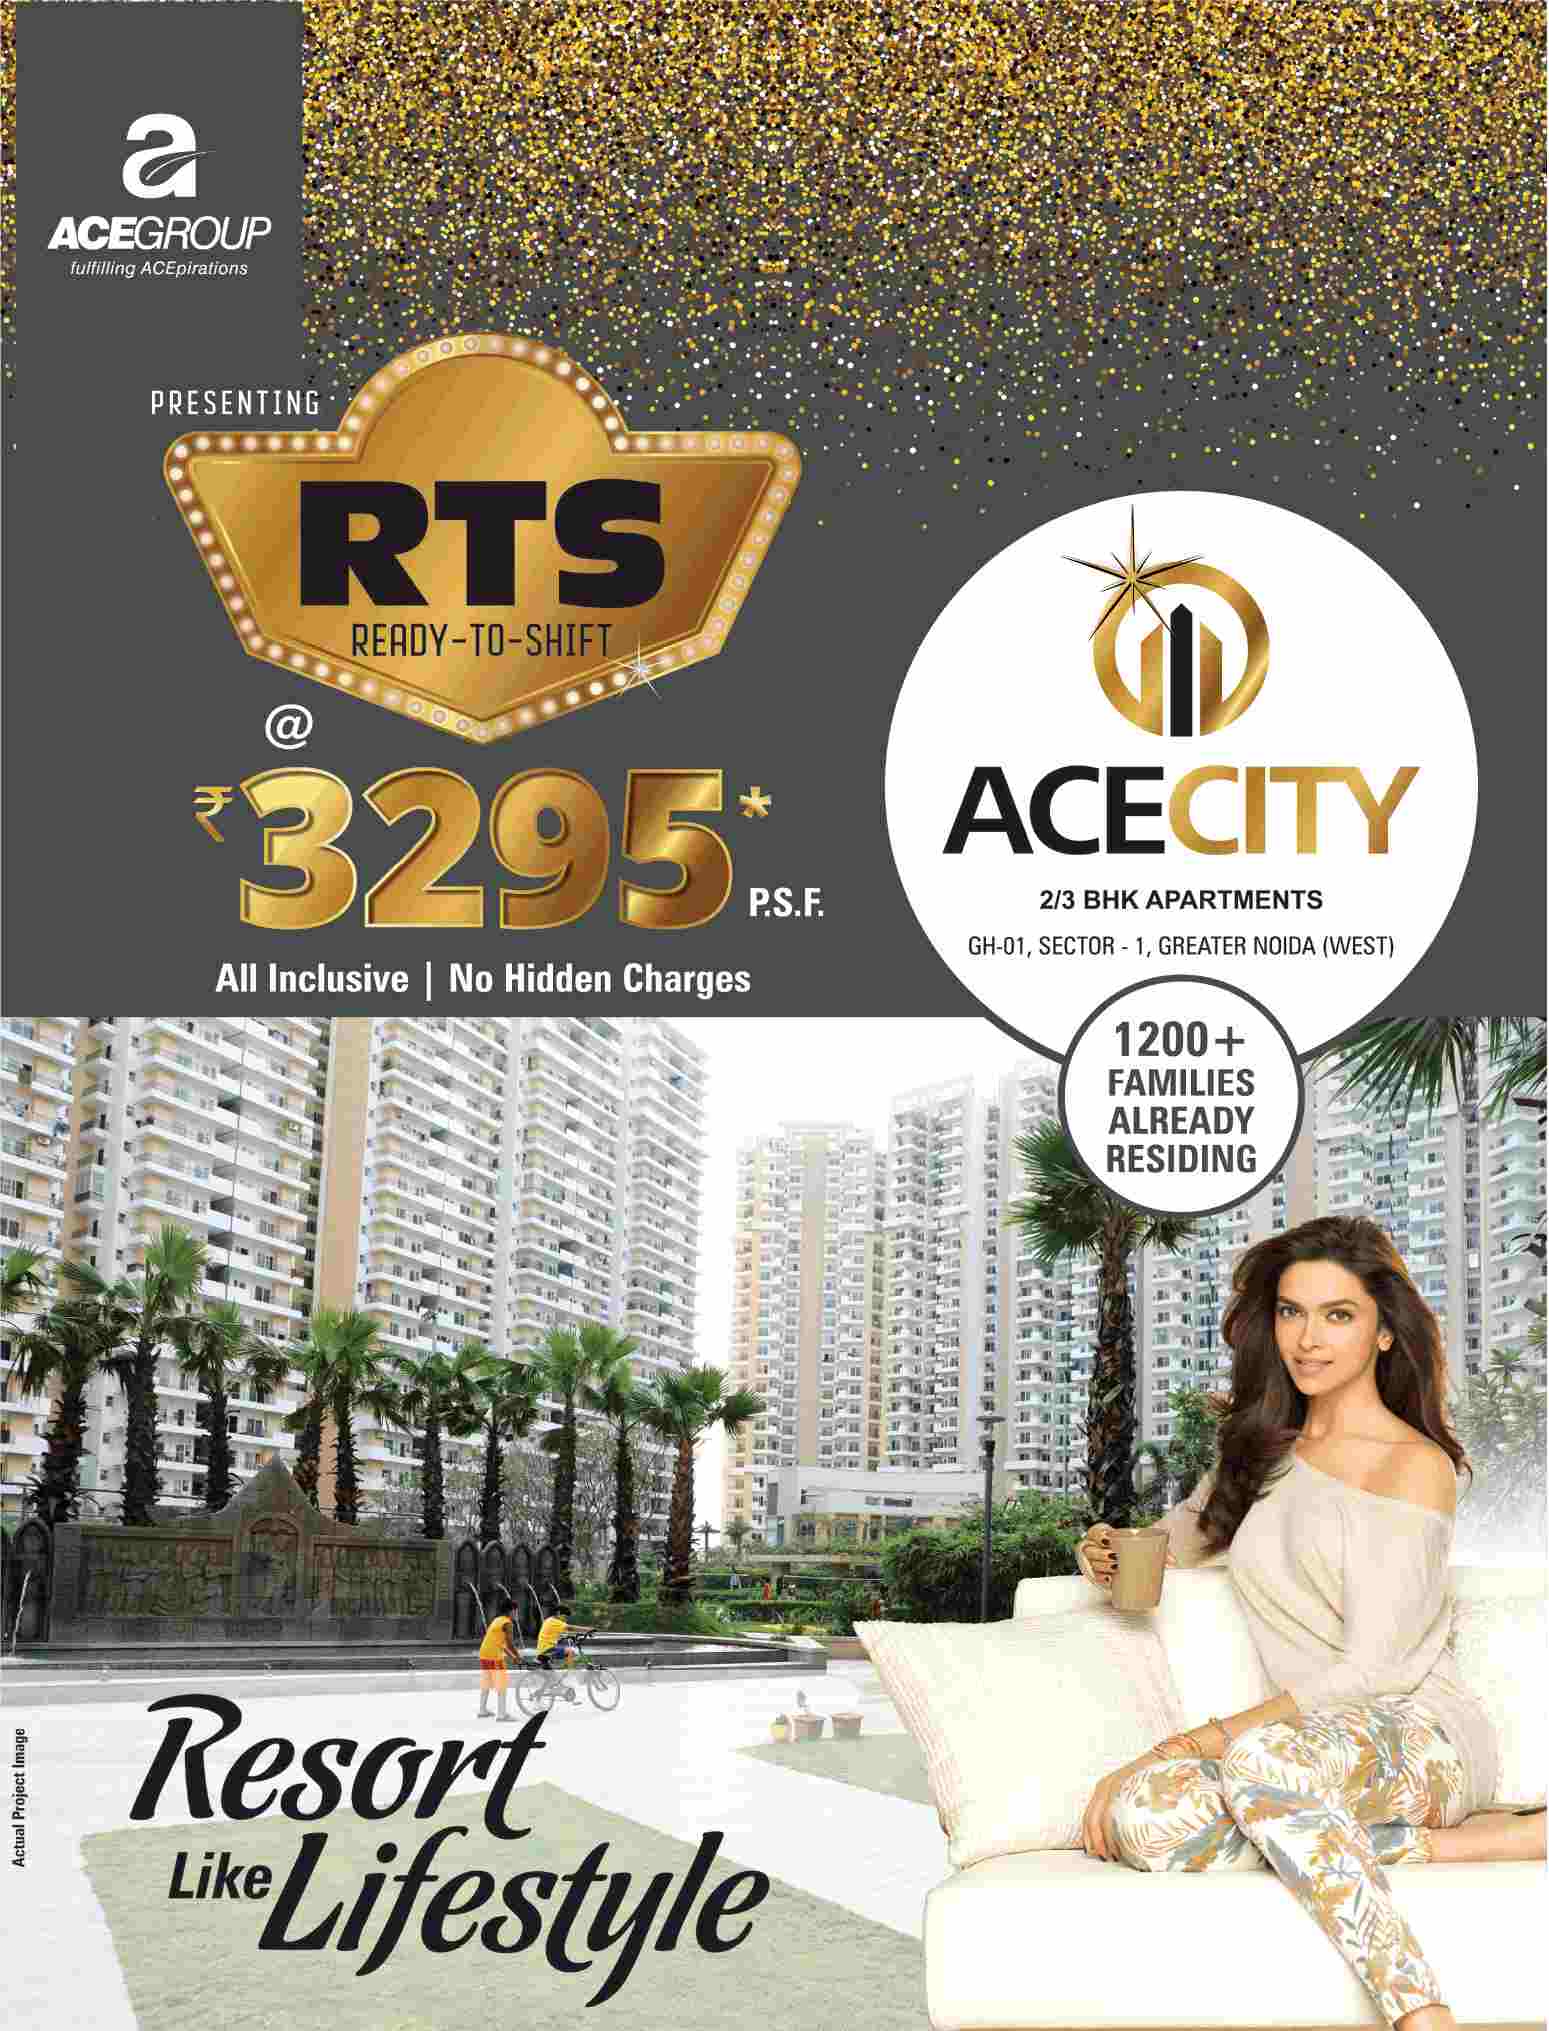 Book Ready-to-Shift homes @ Rs. 3295 per sqft. at Ace City in Greater Noida